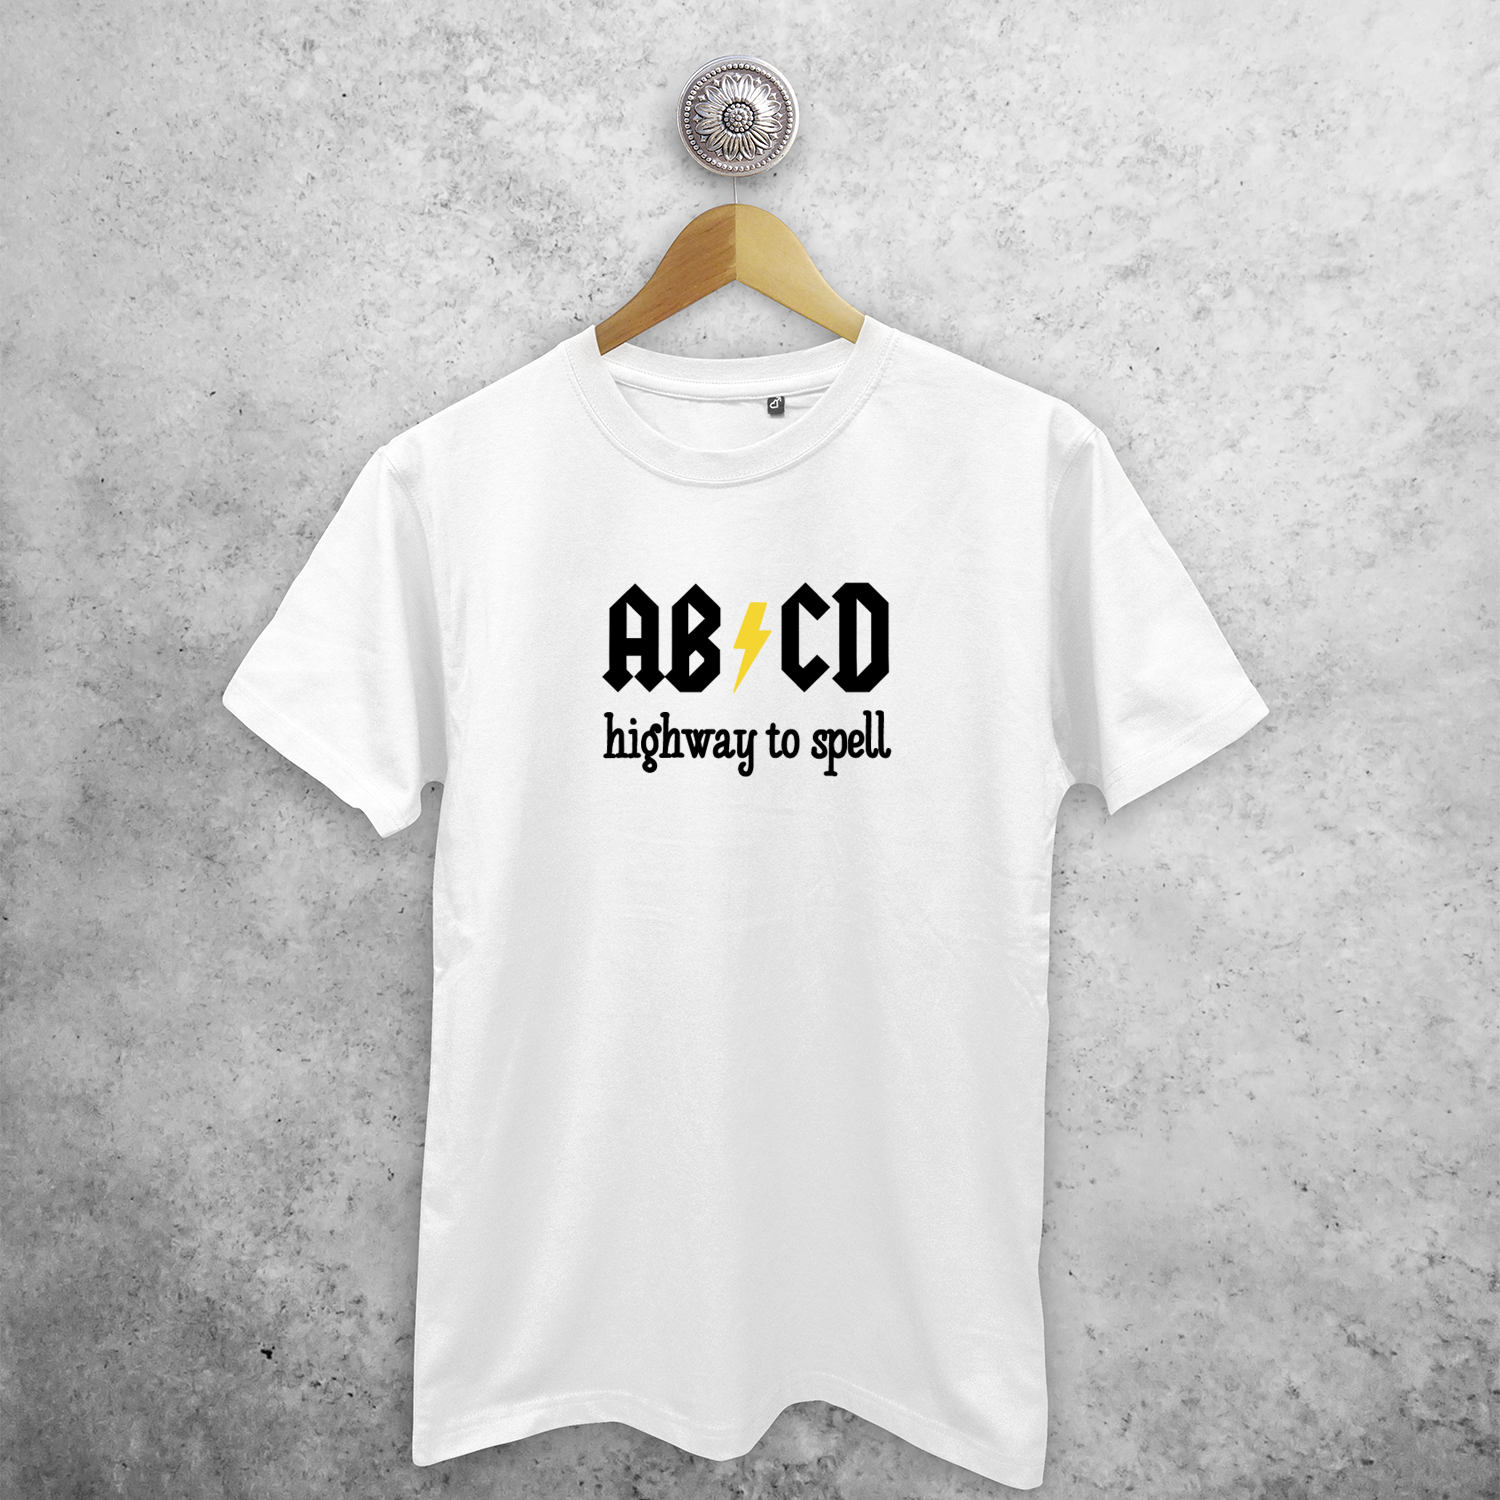 'ABCD - Highway to spell' adult shirt